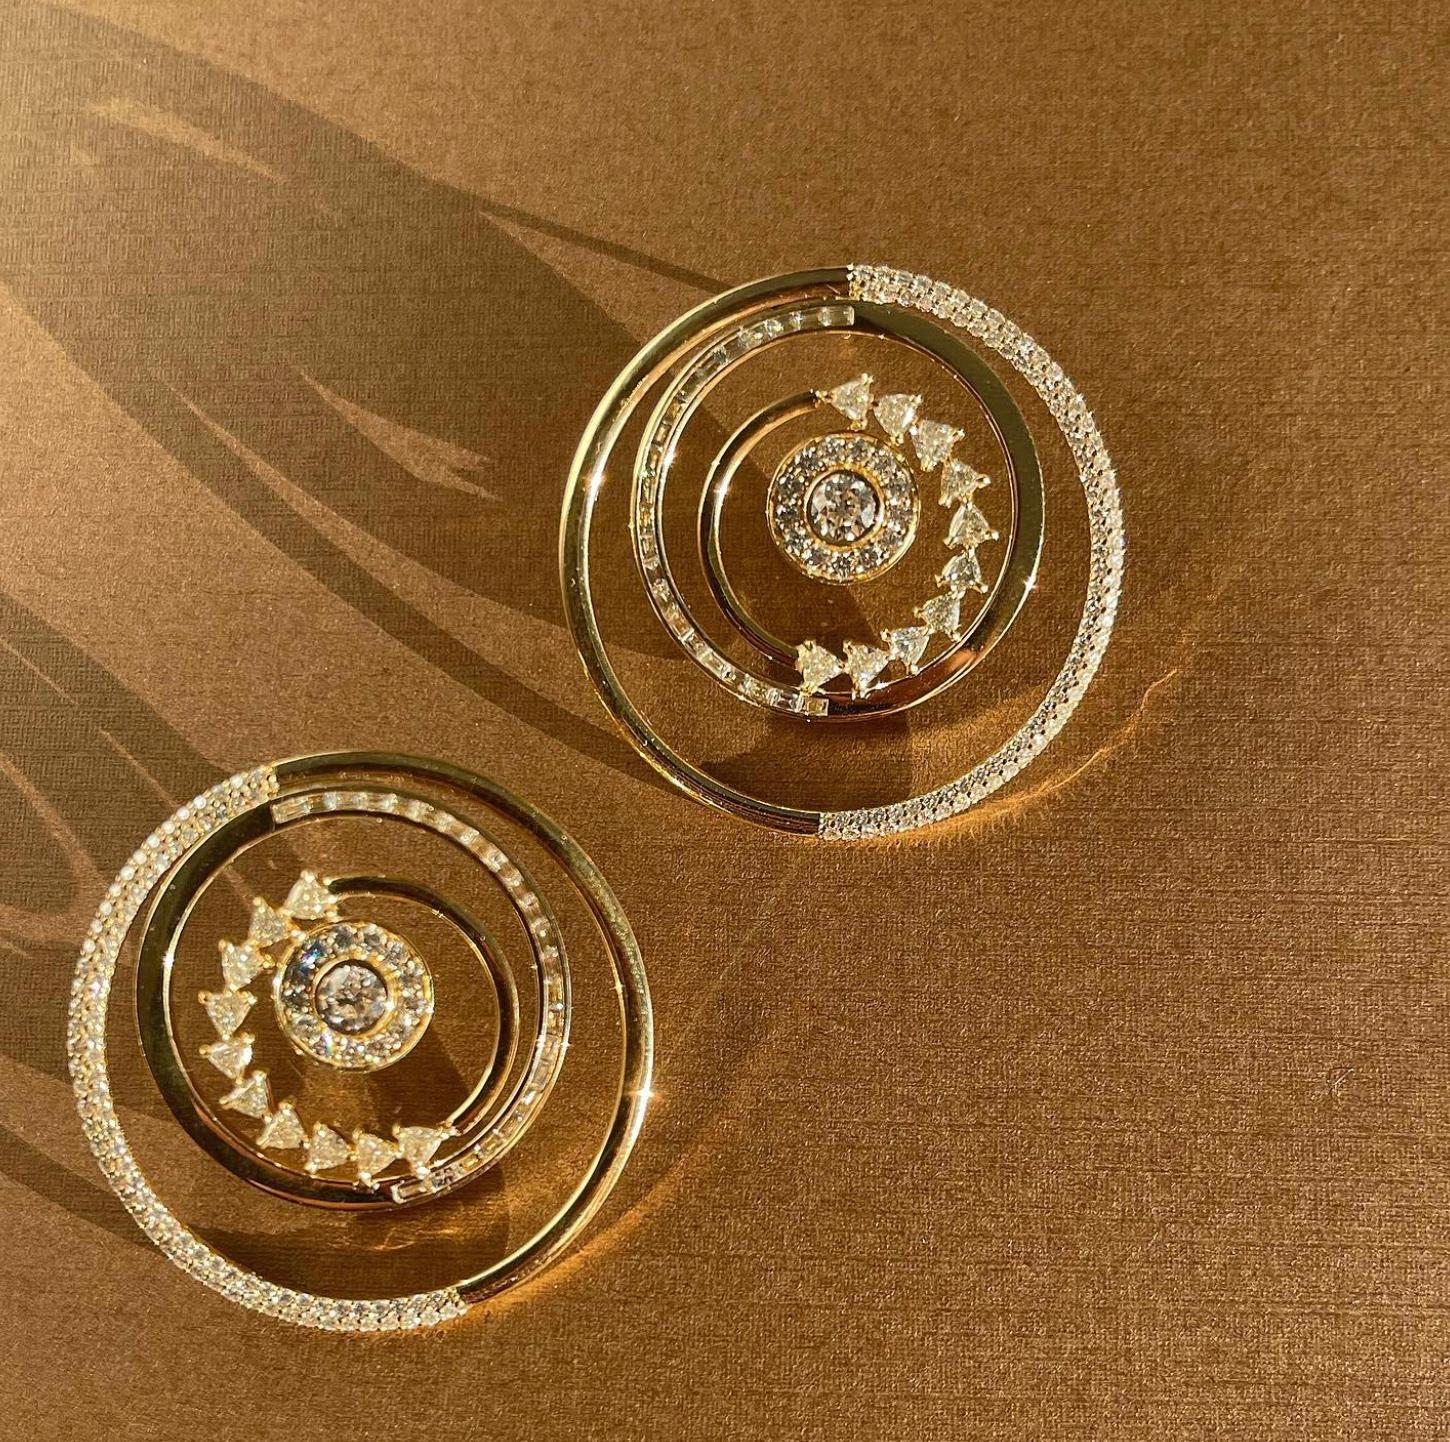 Duo Galaxy Earrings in 18k yellow gold with fancy-cut diamonds

- Round, baguette, and trillion G VS diamonds

- Total diamond weight: 3.20 carats

All our fine jewelry is made to order. A specialist will contact you to confirm the details of the